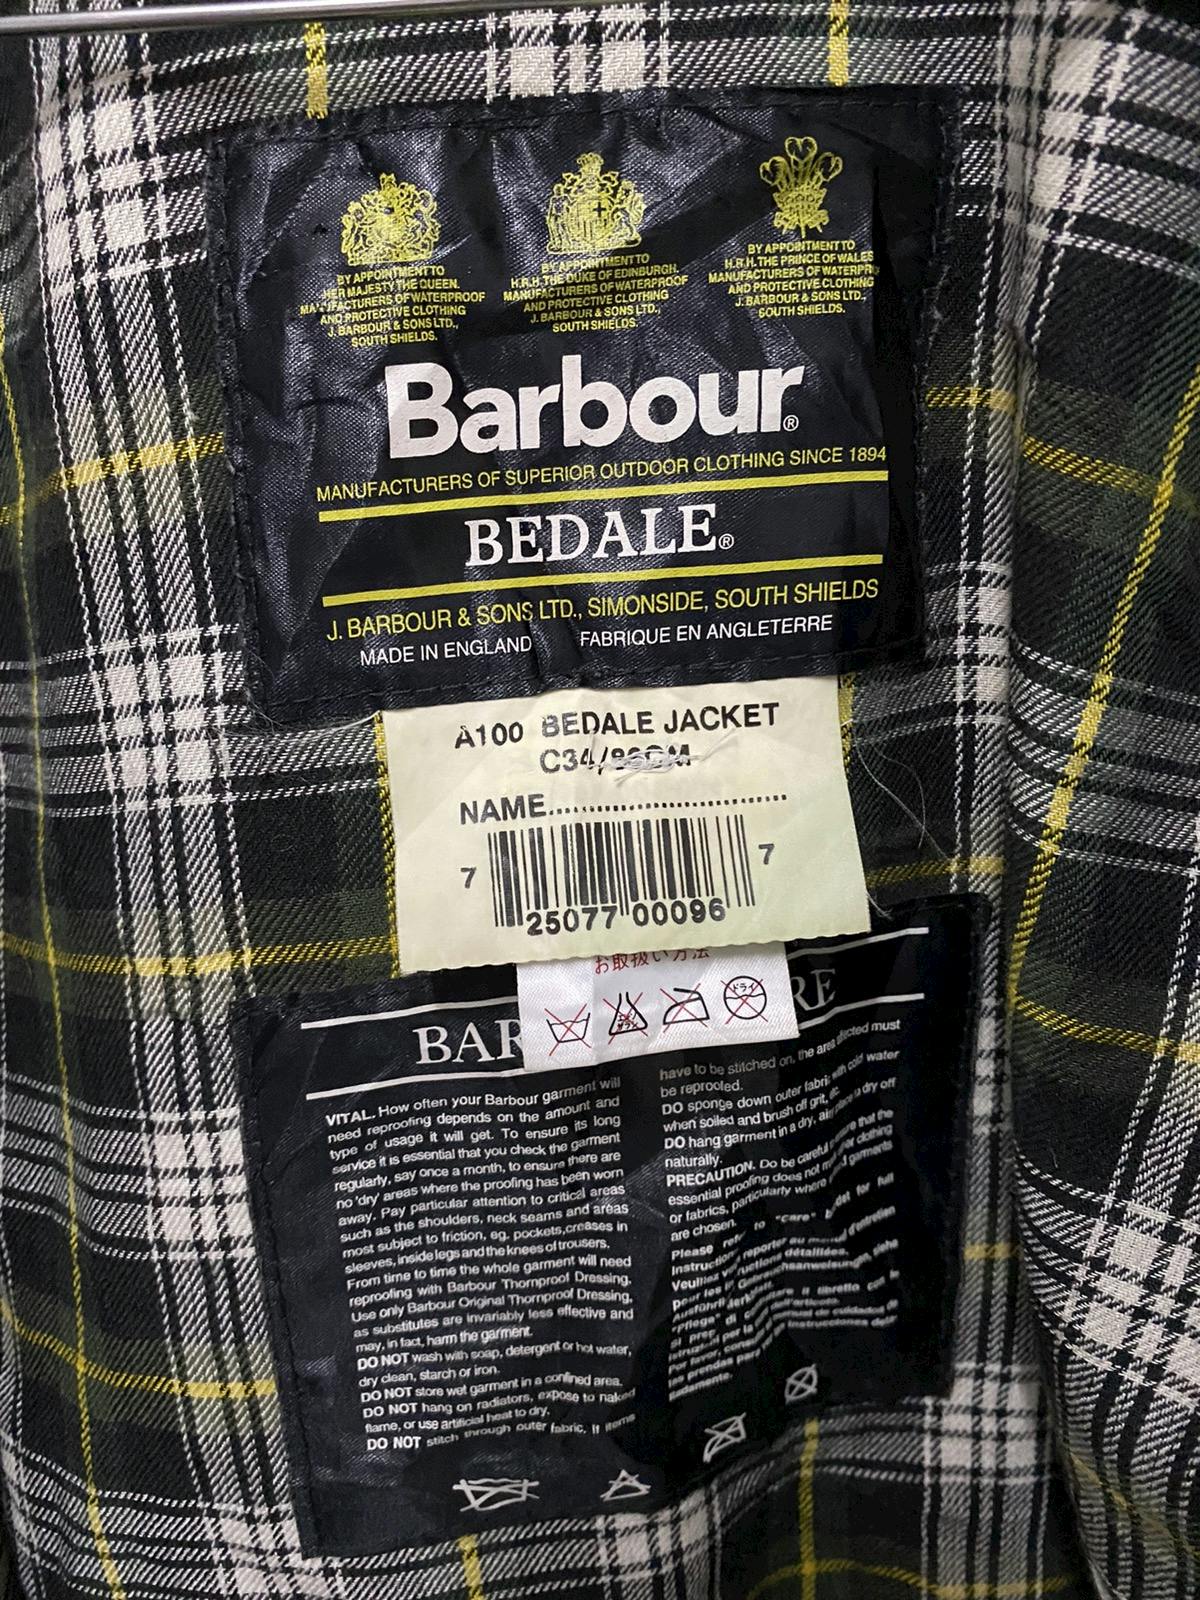 Barbour Bedale A100 Wax Jacket Made in England - 9